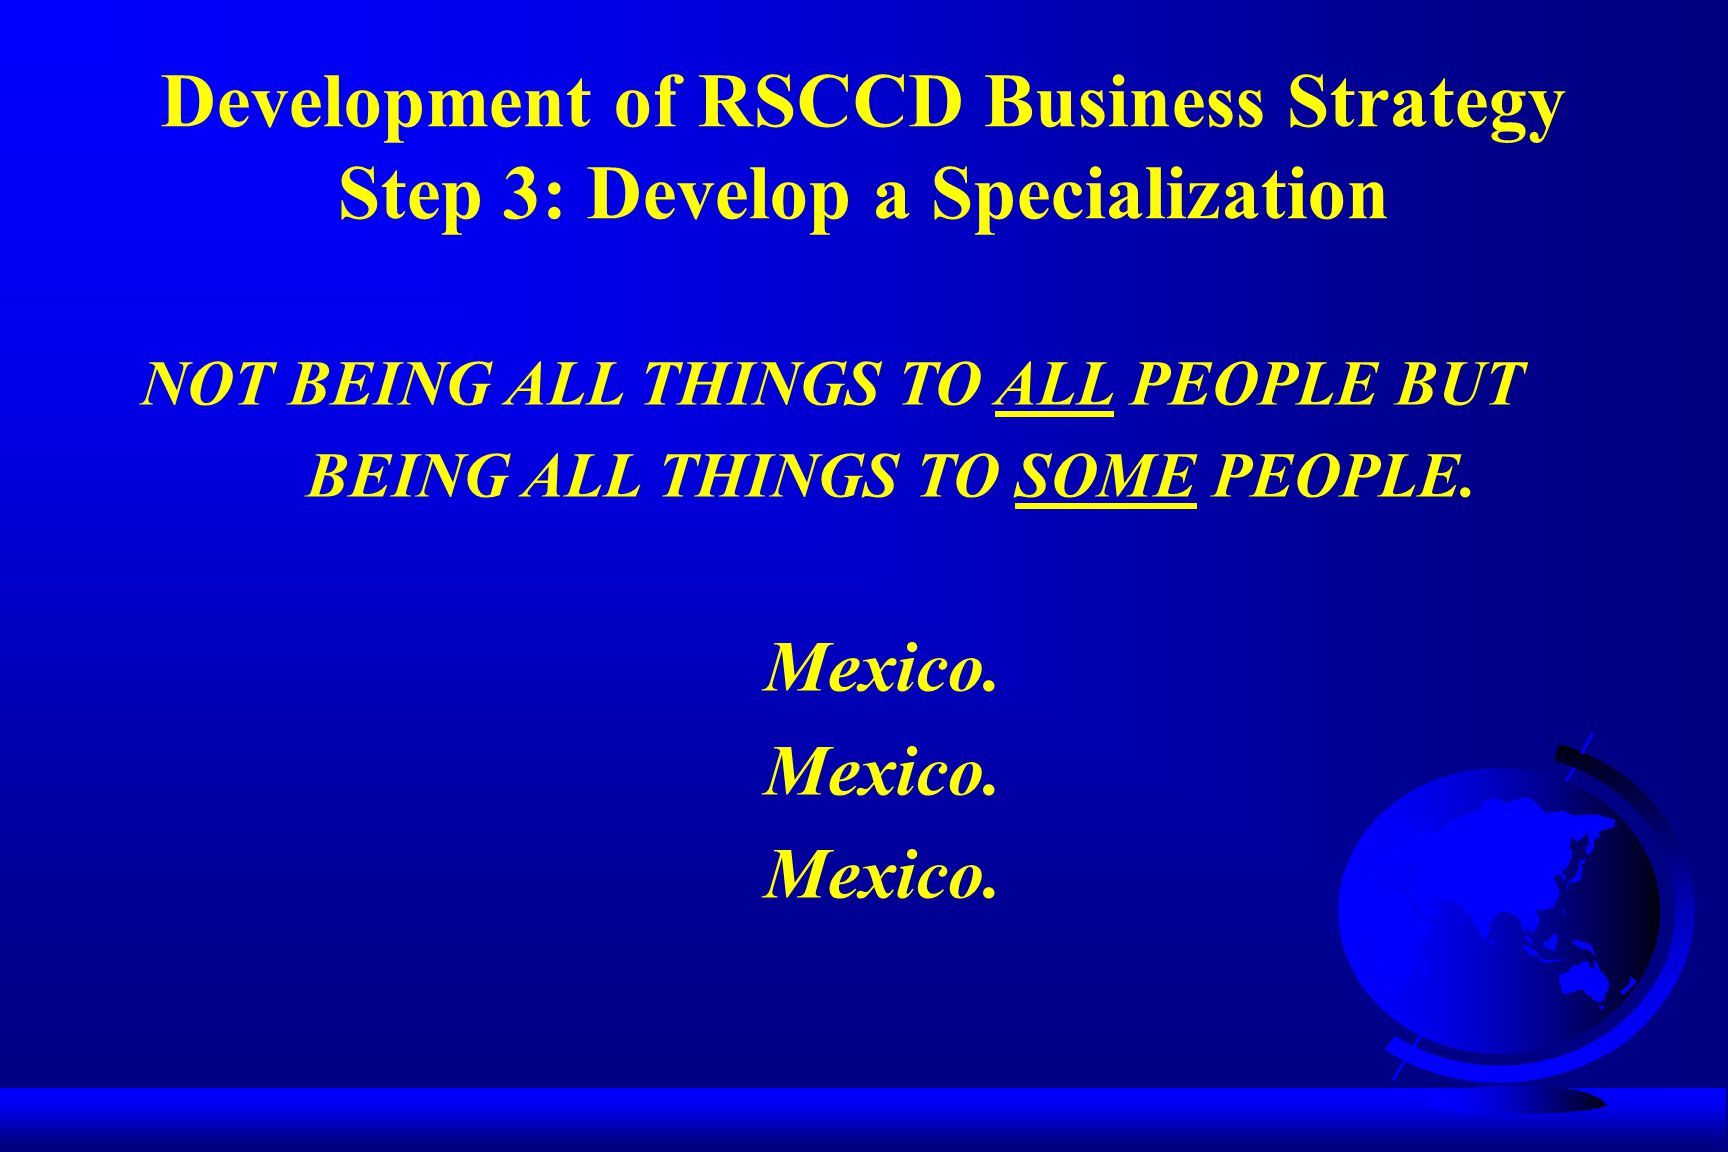 Development of RSCCD Business Strategy Step 3: Develop a Specialization NOT BEING ALL THINGS TO ALL PEOPLE BUT BEING ALL THINGS TO SOME PEOPLE.